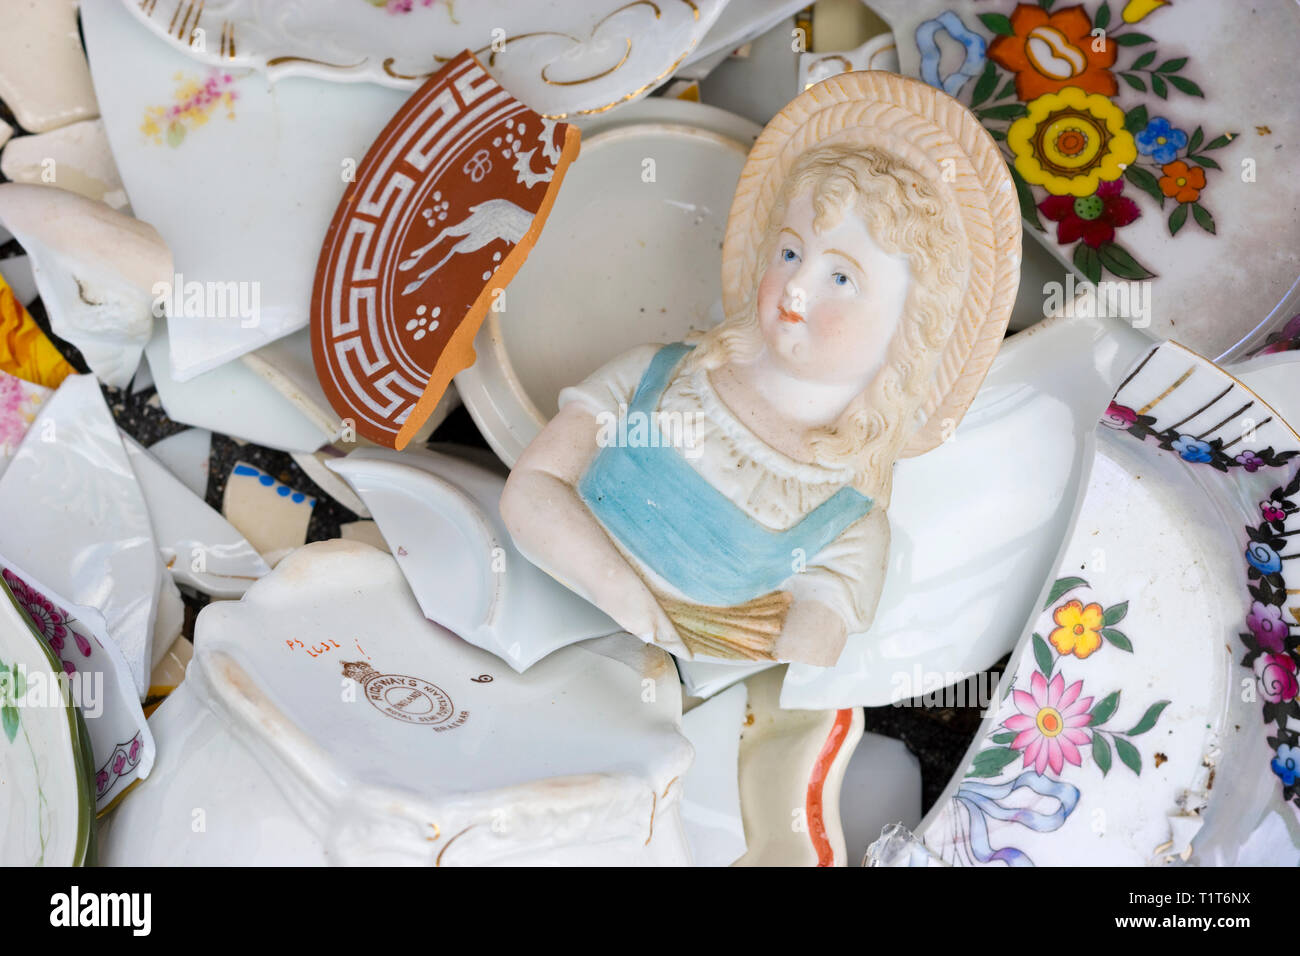 Wreckage of housewares after a Severe storm which is this Stock Photo